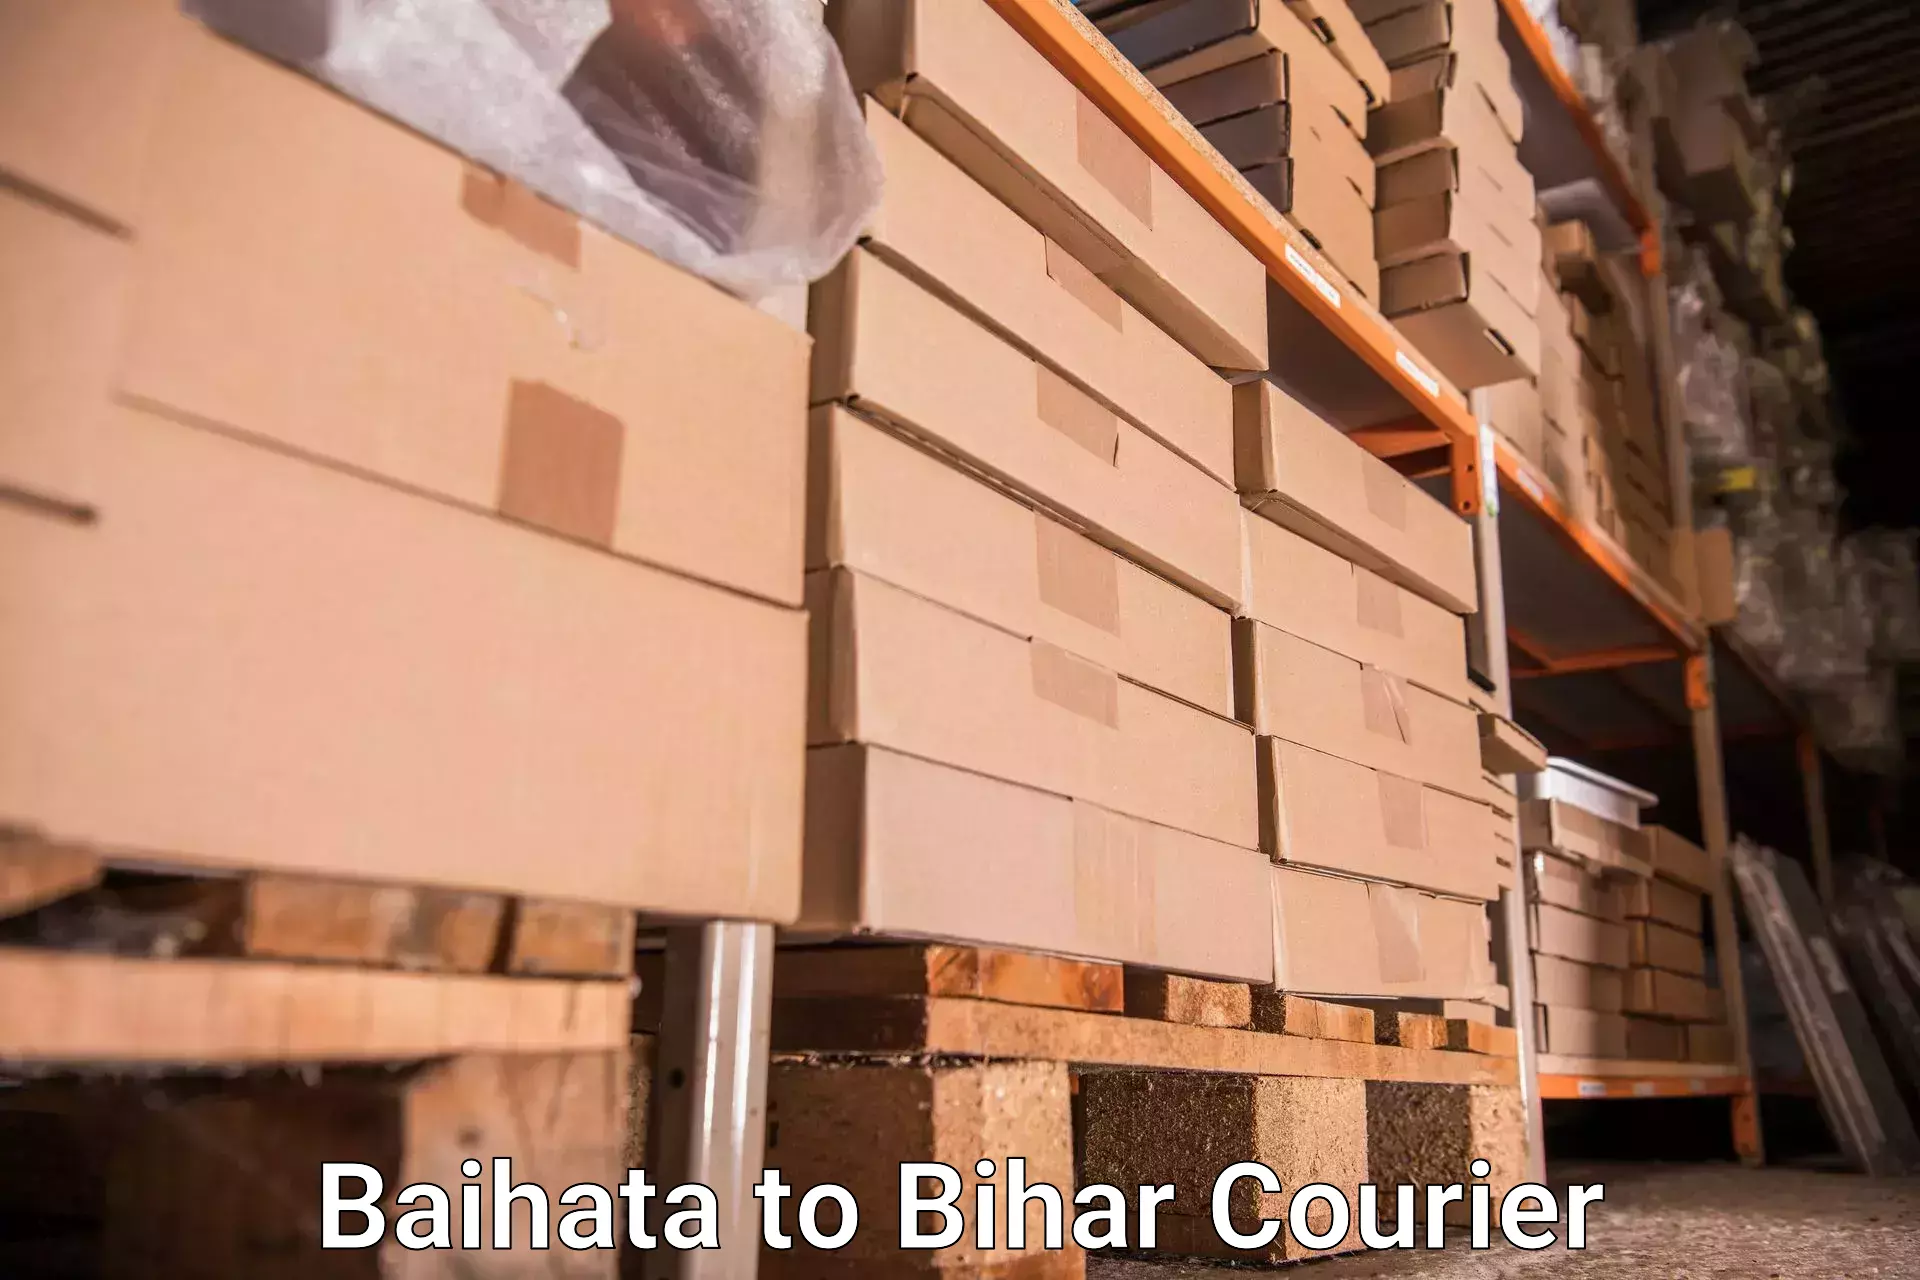 Baggage relocation service in Baihata to Patna